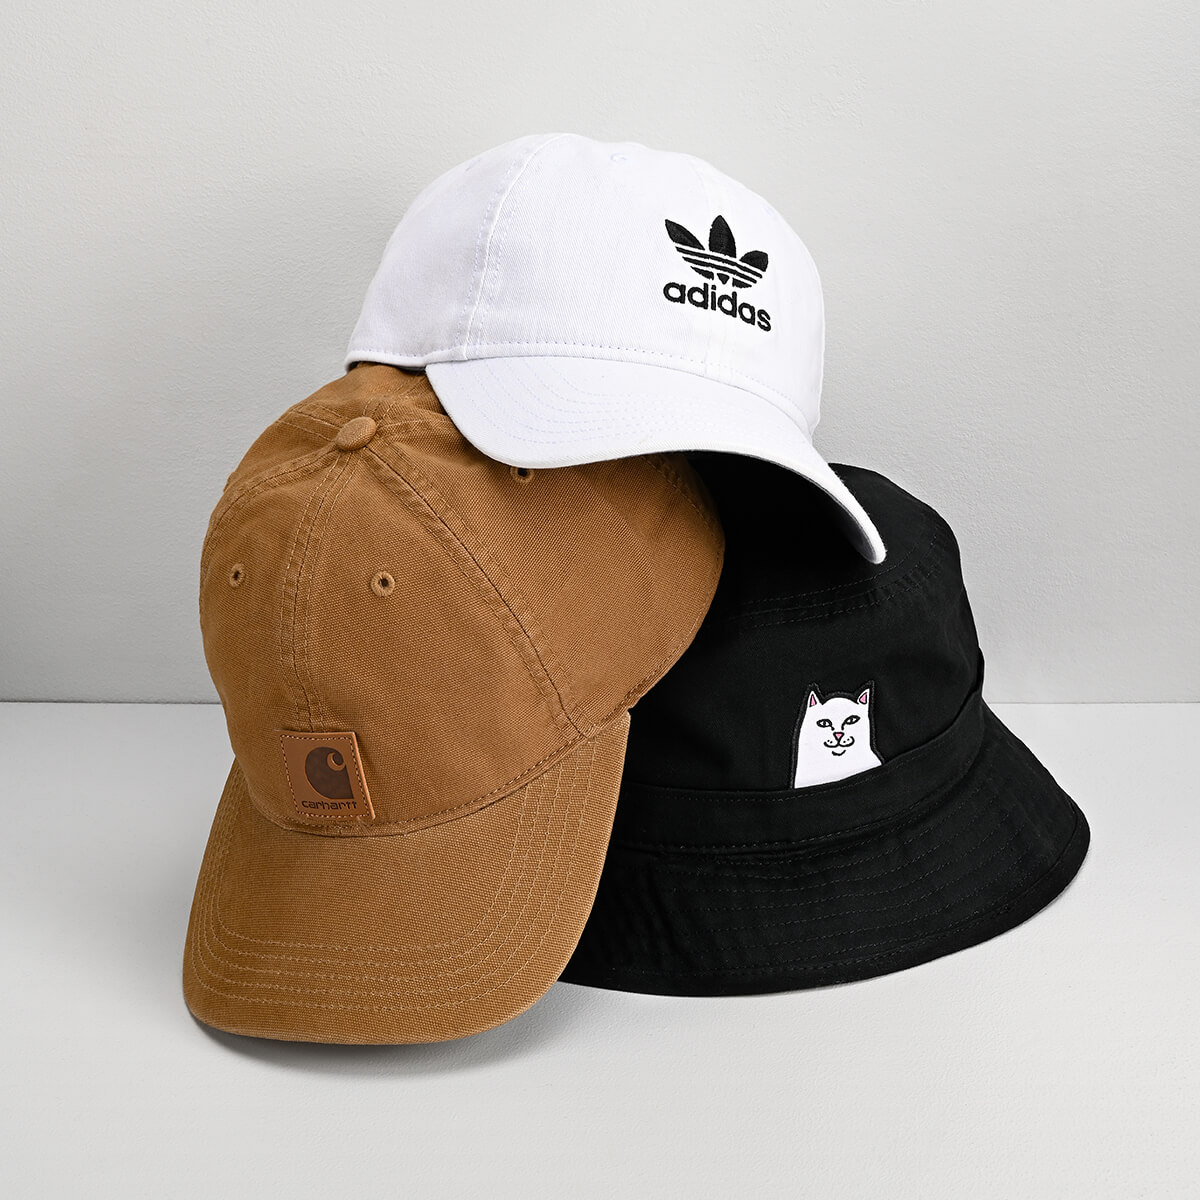 NEW HATS TO COVER THE HOLIDAYS - SHOP HATS